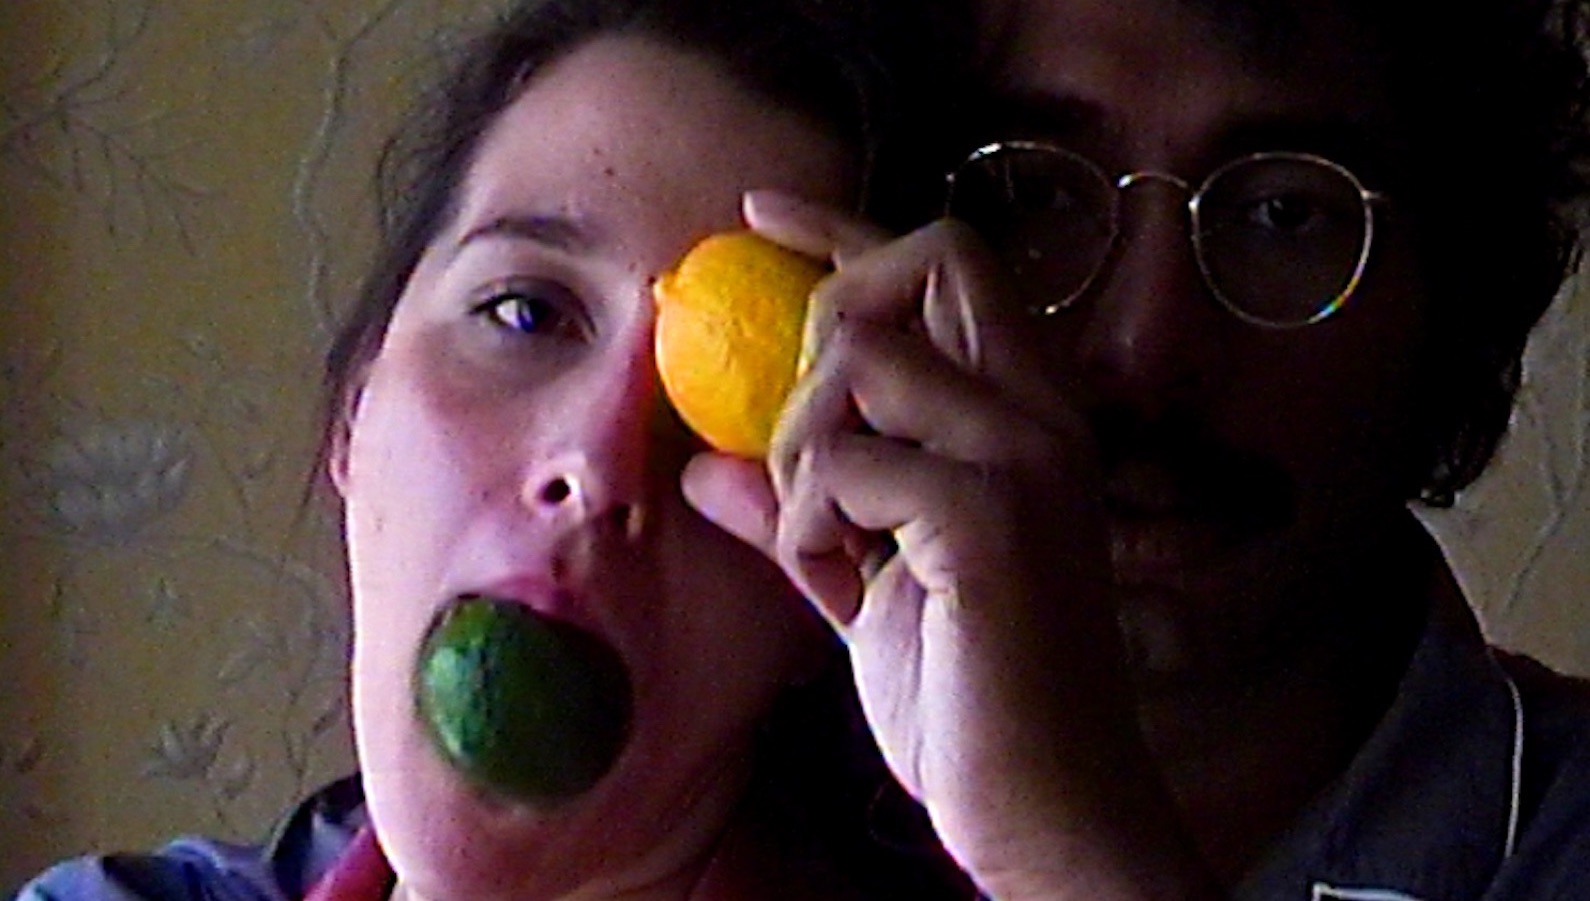 A woman holds a lime in her mouth and a lemon against her eye, with a bespectacled man behind her